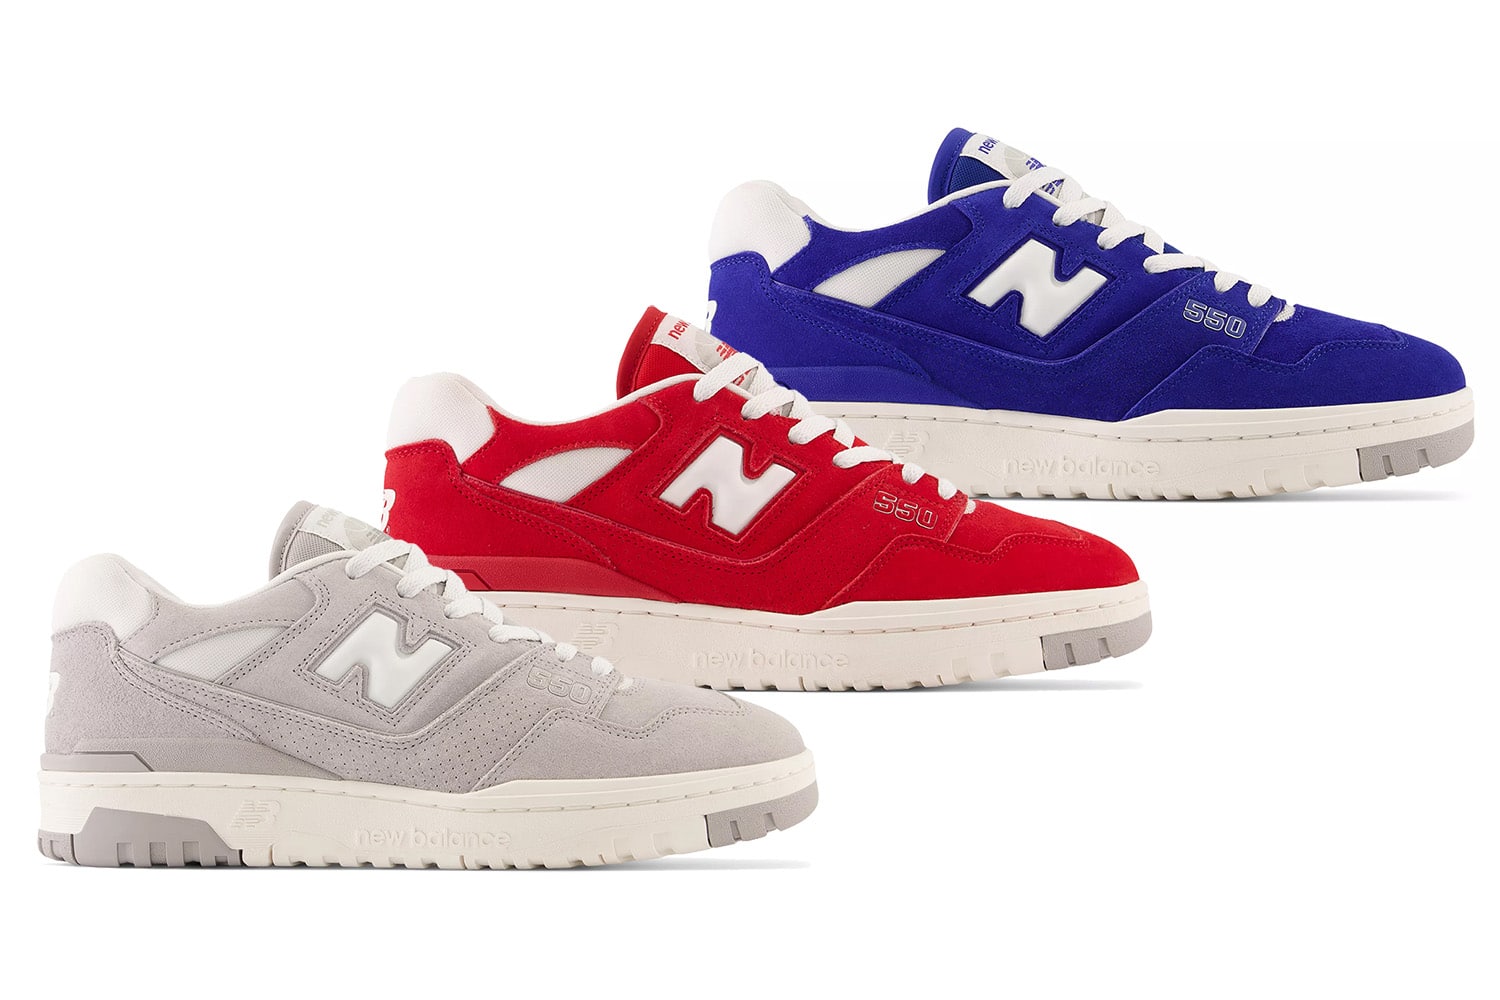 New Balance 550 Suede Pack